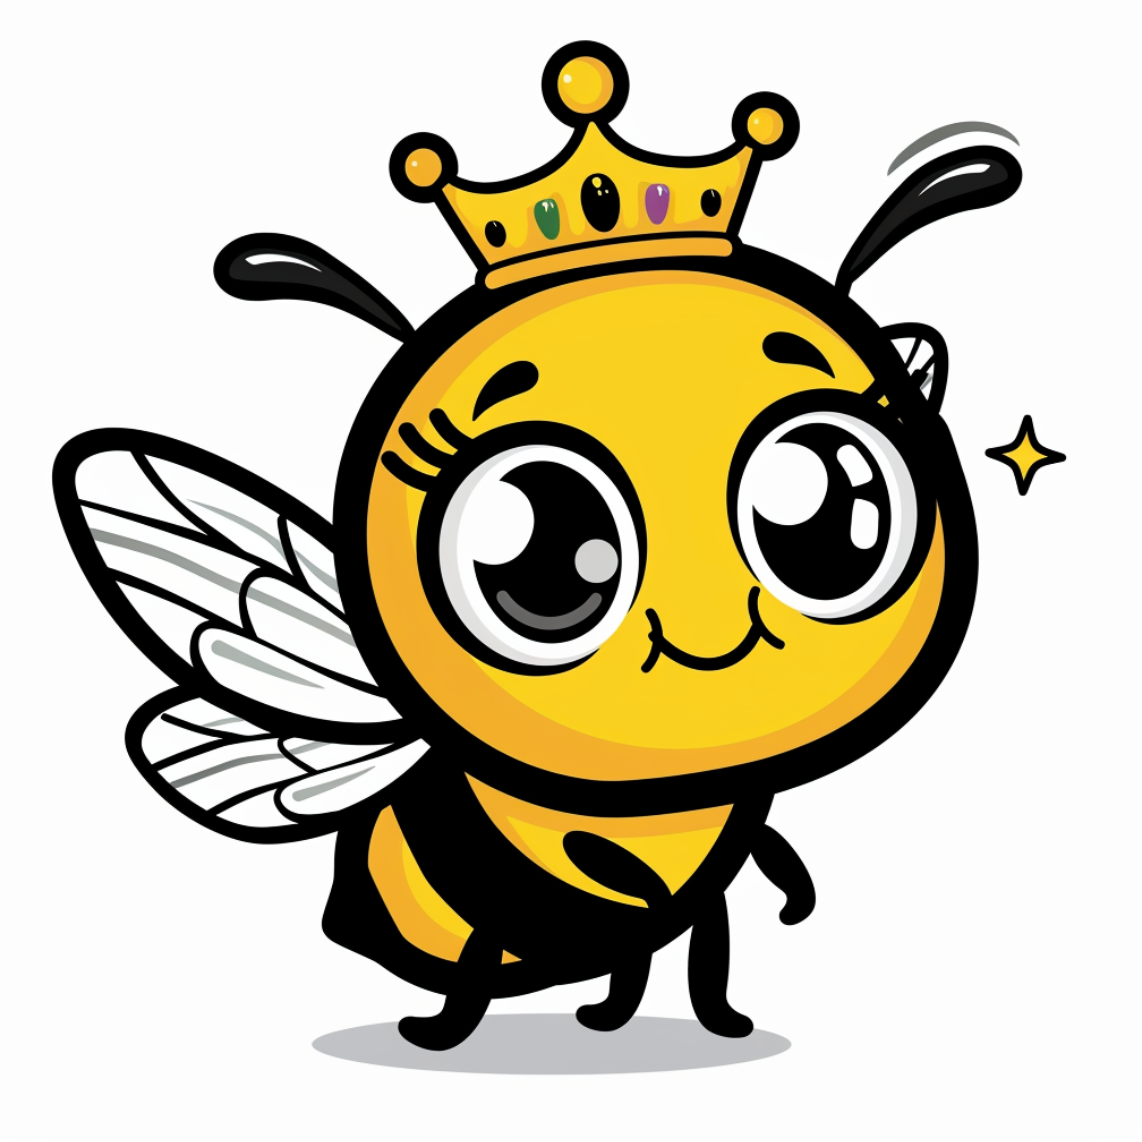 Become a Queen Bee